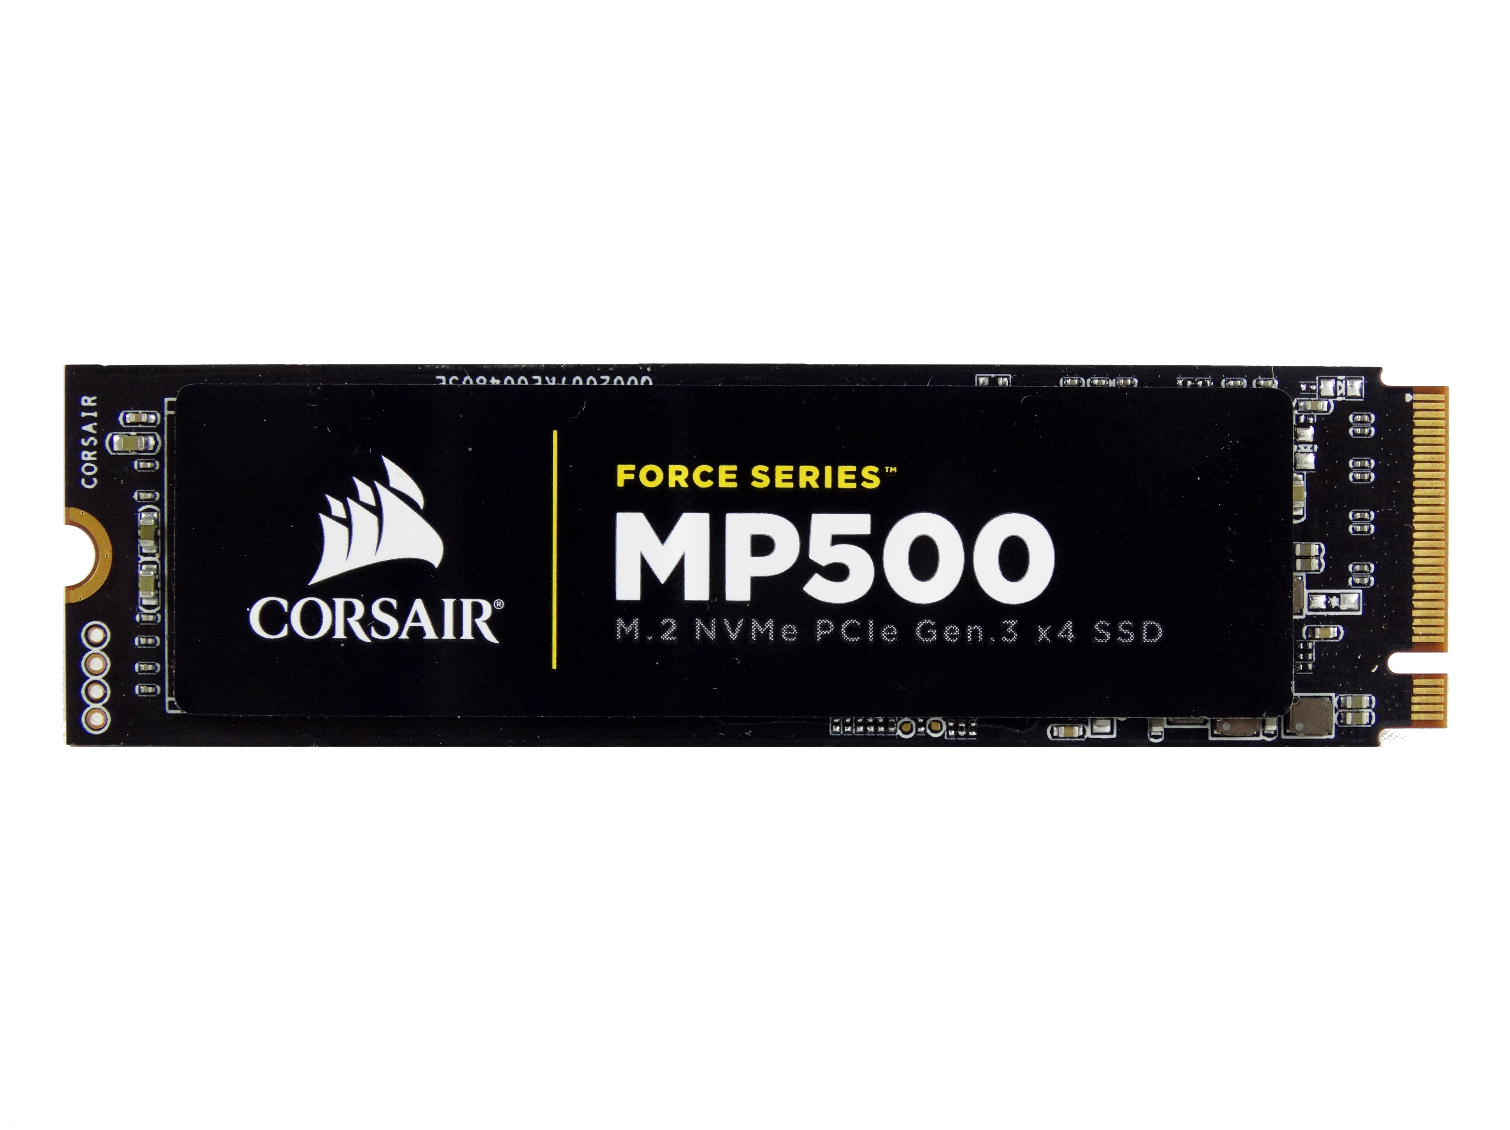 Hofte interferens placere Corsair Force Series MP500 M.2 NVMe SSD Review - Tom's Hardware | Tom's  Hardware